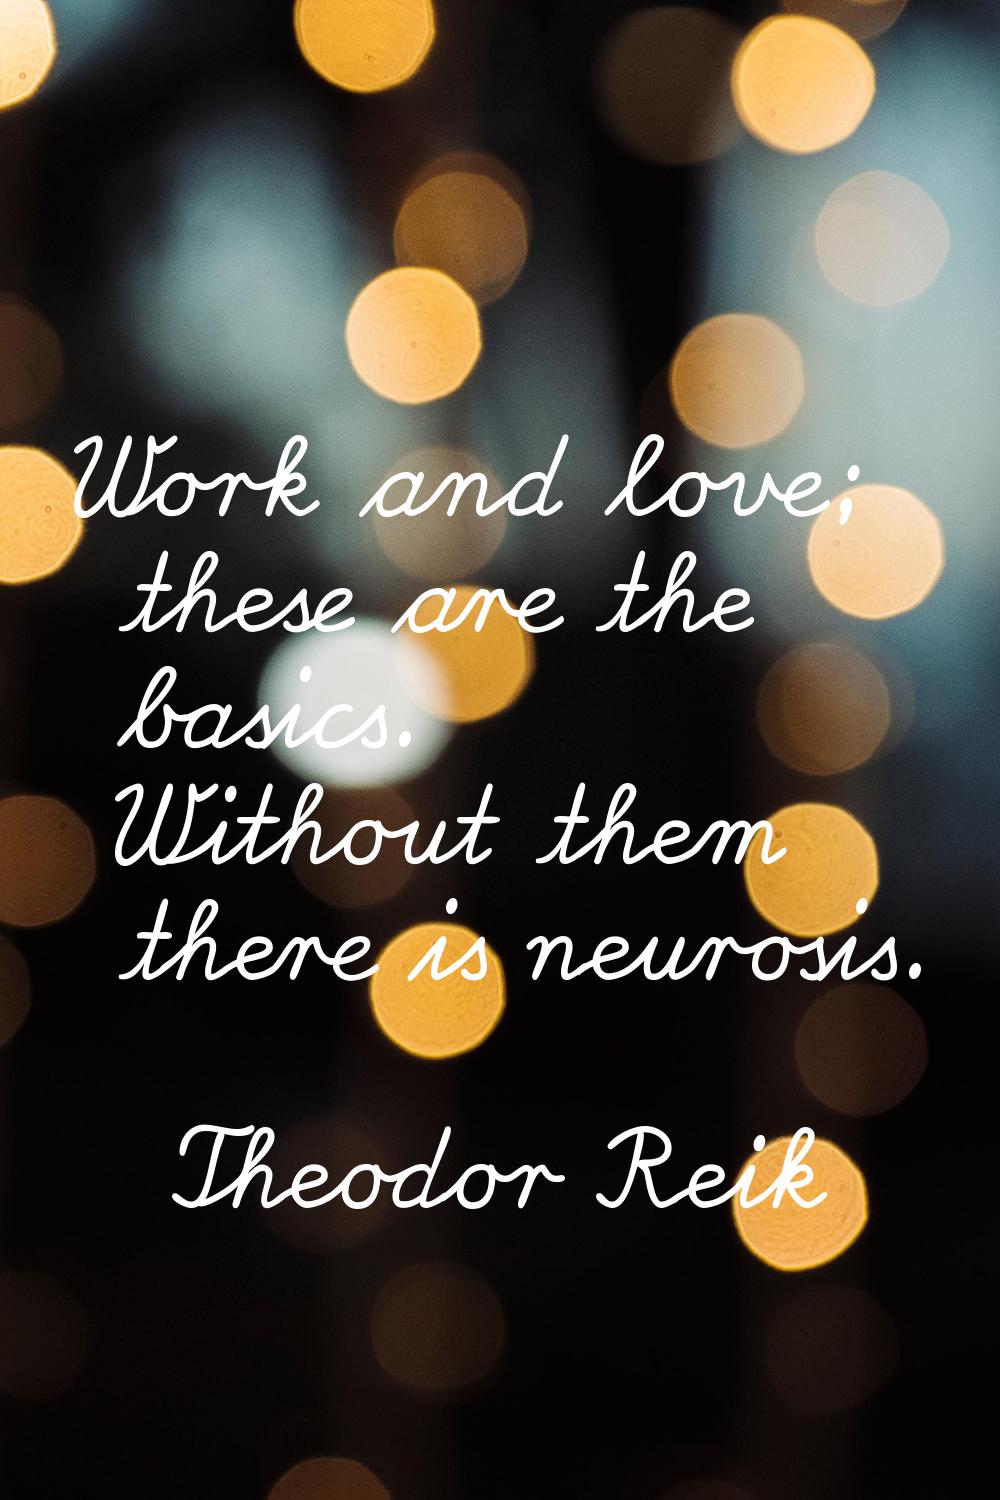 Work and love; these are the basics. Without them there is neurosis.